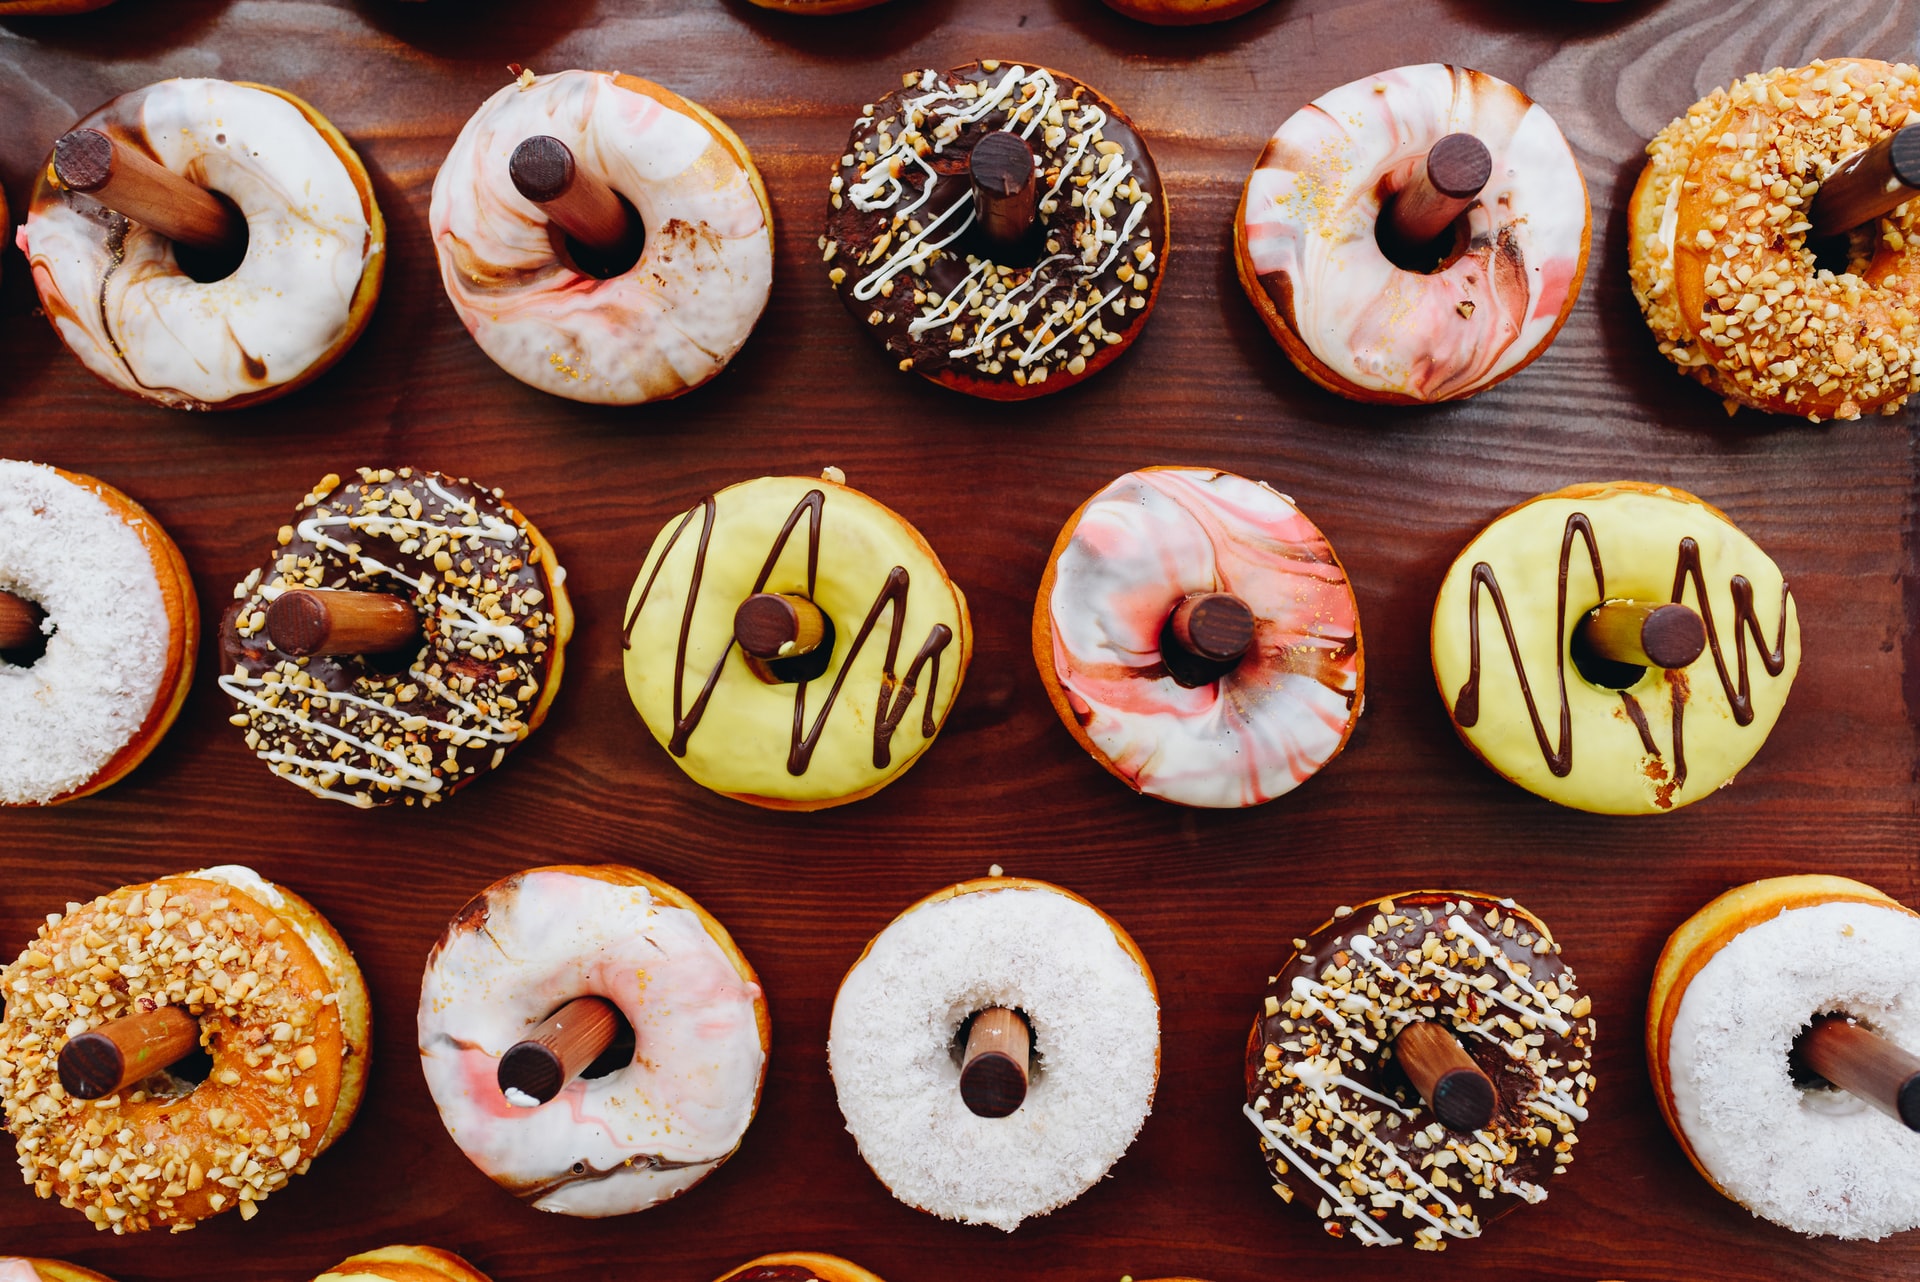 Sweet Meets Savory at Donut Villa Diner, Now Open in Cambridge